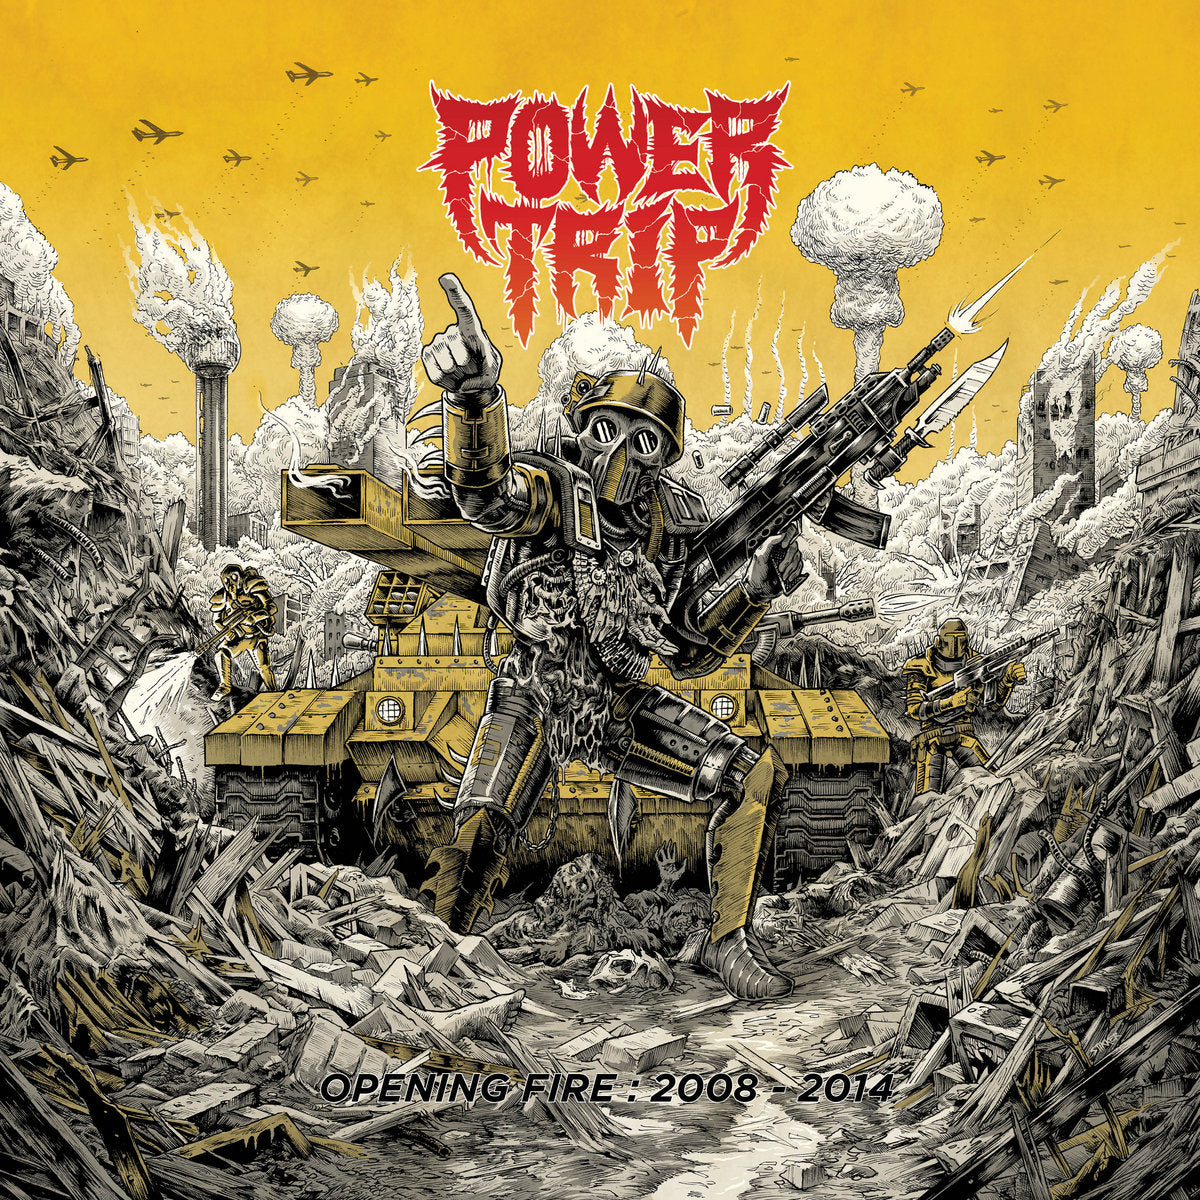 POWER TRIP 'OPENING FIRE: 2008-2014' LP / COLORED EDITIONS